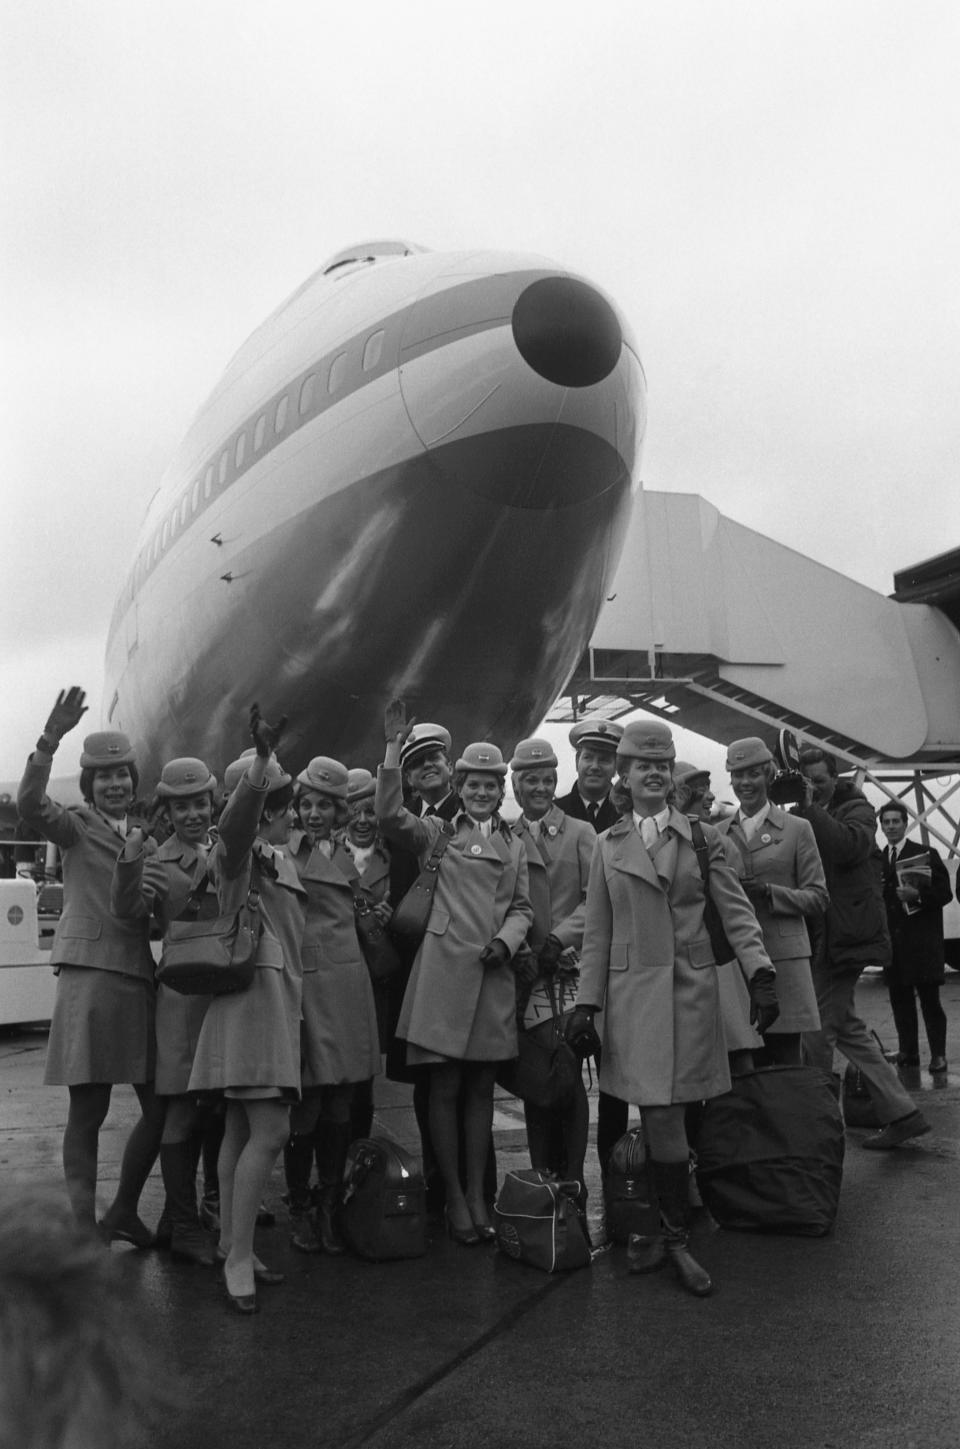 FILE - The crew of a Boeing 747 Jumbo Jet pose in front of the nose of the plane at London's Heathrow Airport in England on Jan. 12, 1970. The 360 seat jet was the first of its kind to complete a transatlantic crossing. Boeing bids farewell to an icon on Tuesday, Jan. 31, 2023, when it delivers the jumbo jet to cargo carrier Atlas Air. Since it debuted in 1969, the 747 has served as a cargo plane, a commercial aircraft capable of carrying nearly 500 passengers, and the Air Force One presidential aircraft, but it has been rendered obsolete by more profitable and fuel-efficient models. (AP Photo, File)